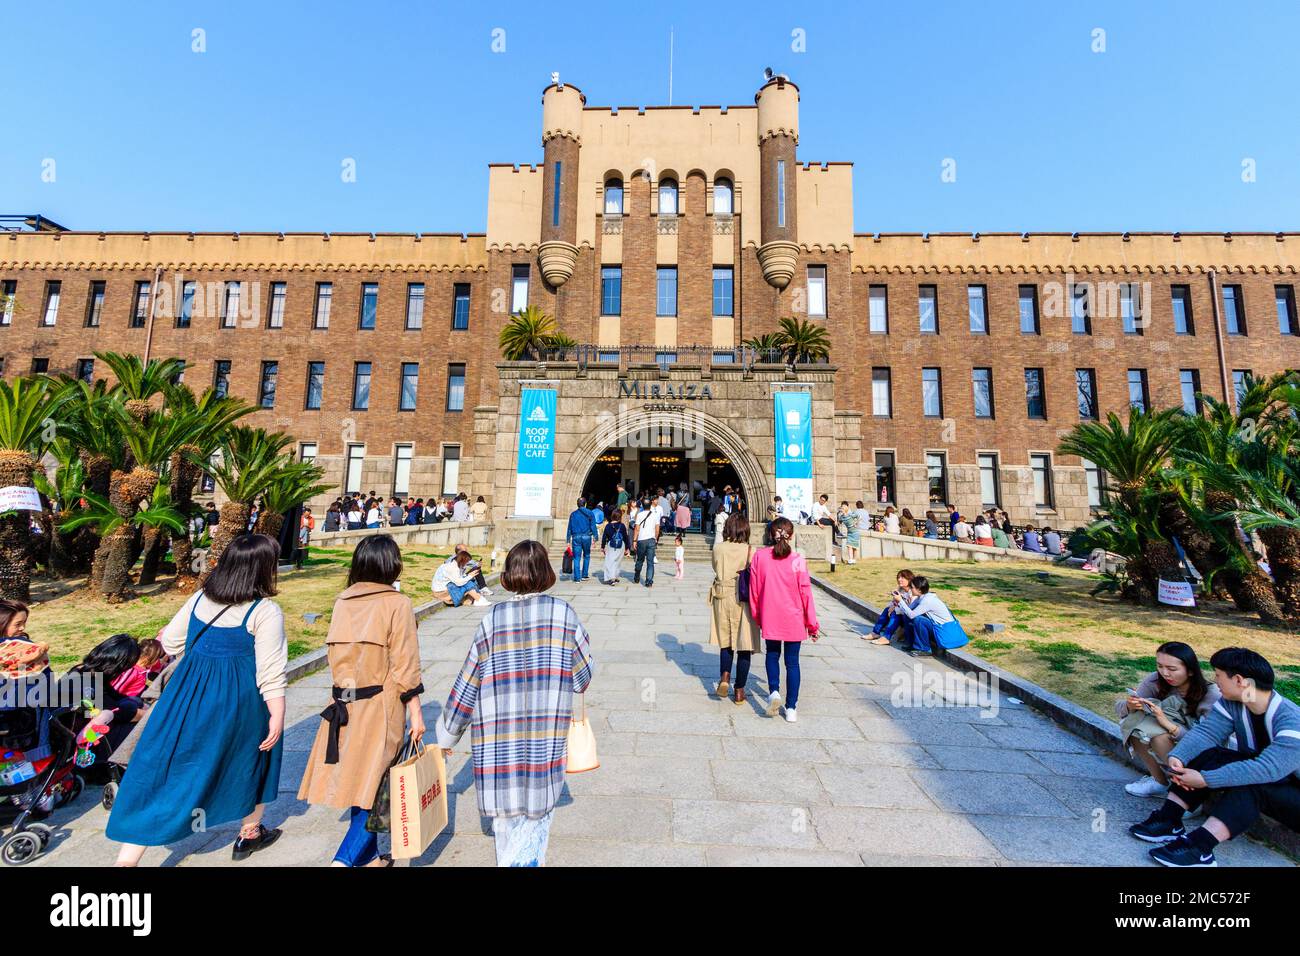 People walking to the main entrance of the imposing Miraiza building, containing shops and restaurants at Osaka castle in the springtime. Blue sky. Stock Photo